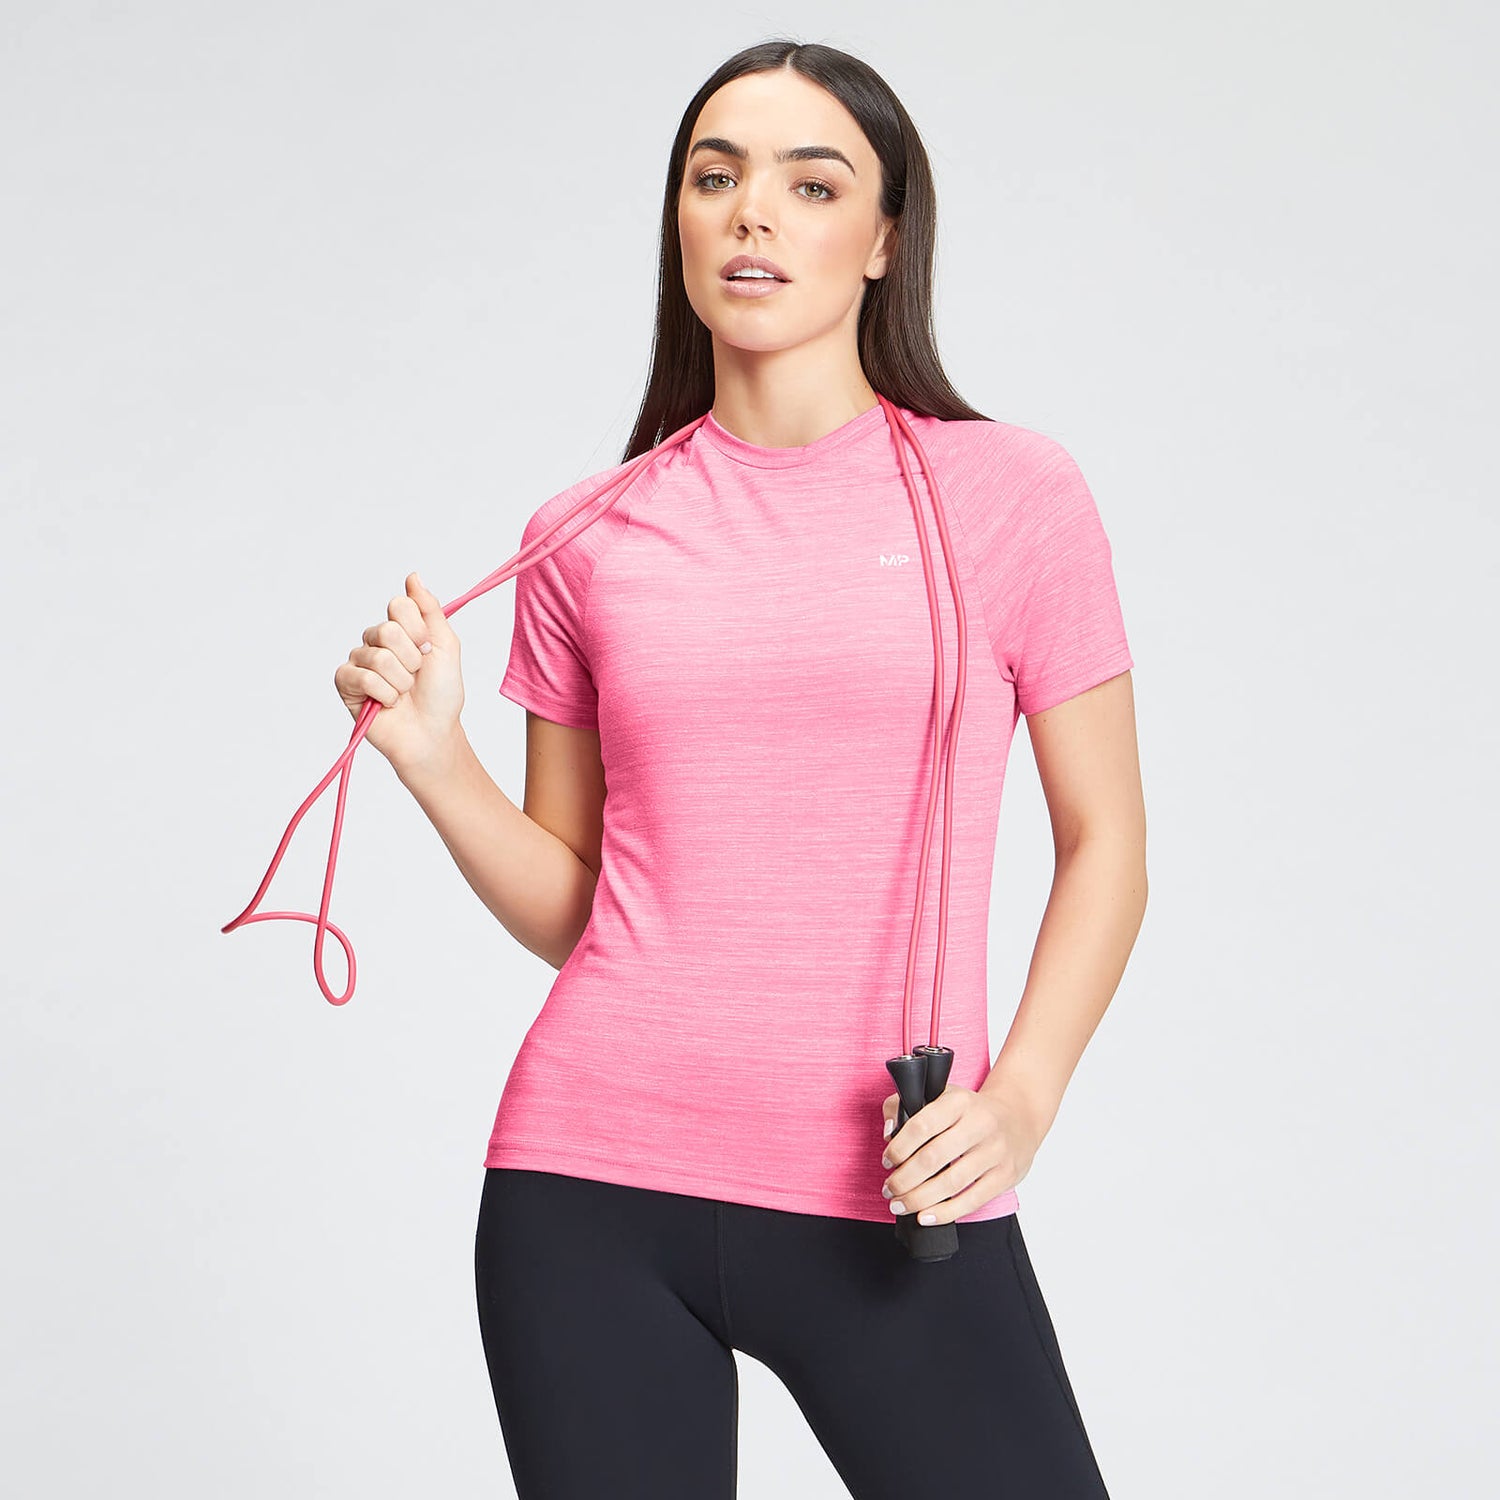 MP Women's Performance Training T-Shirt - Candyfloss Marl with White Fleck